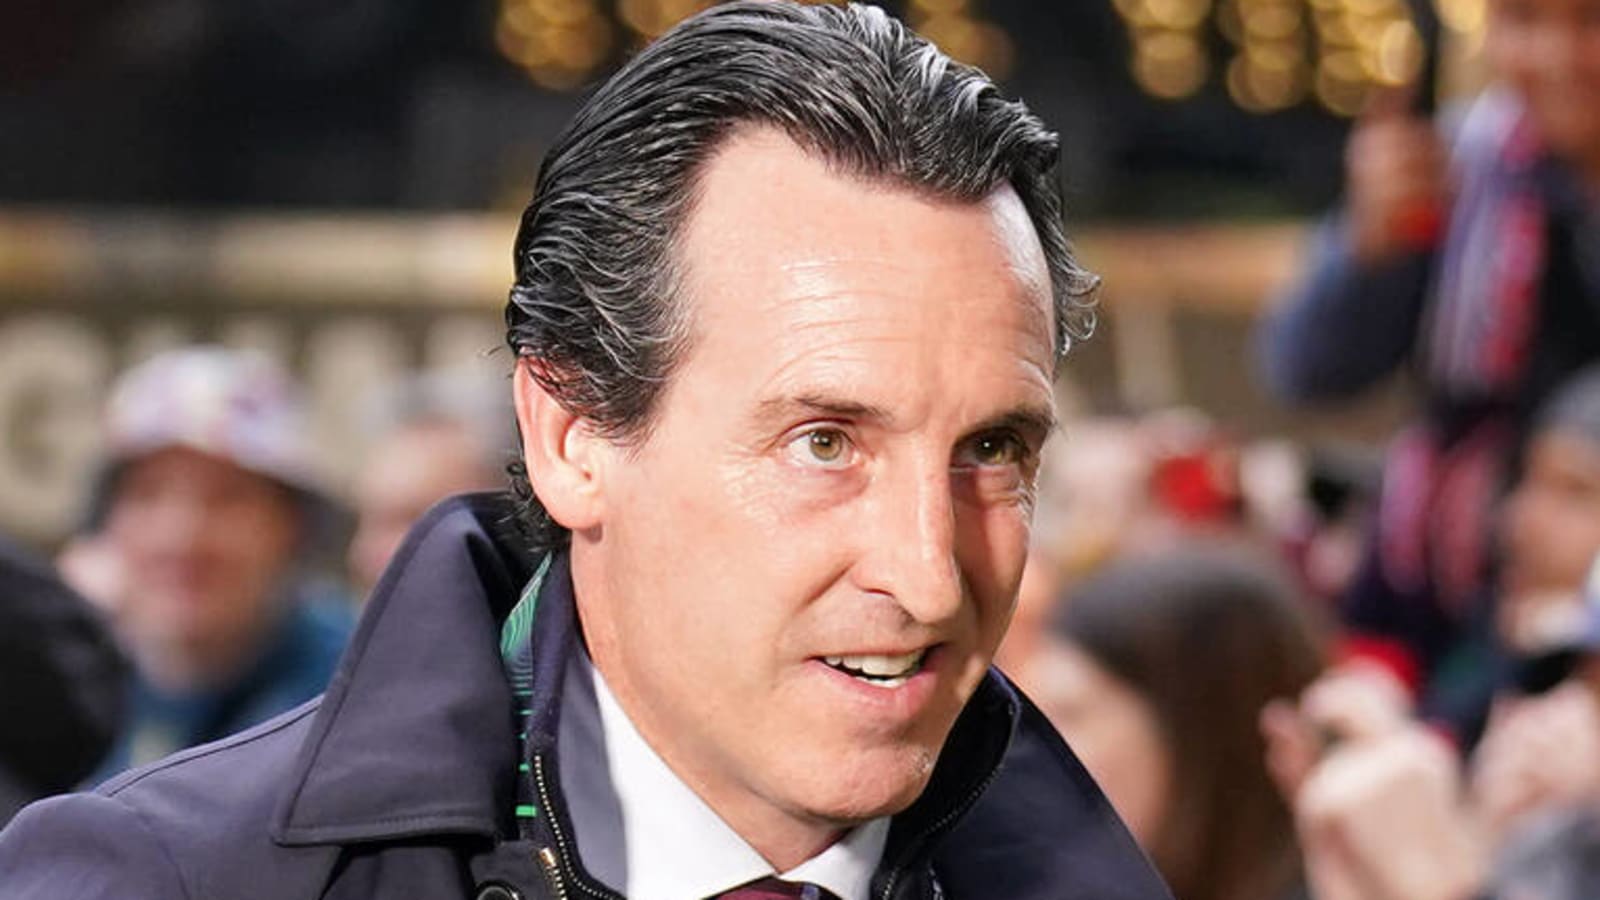 Unai Emery does not think it helps that he has managed Arsenal before